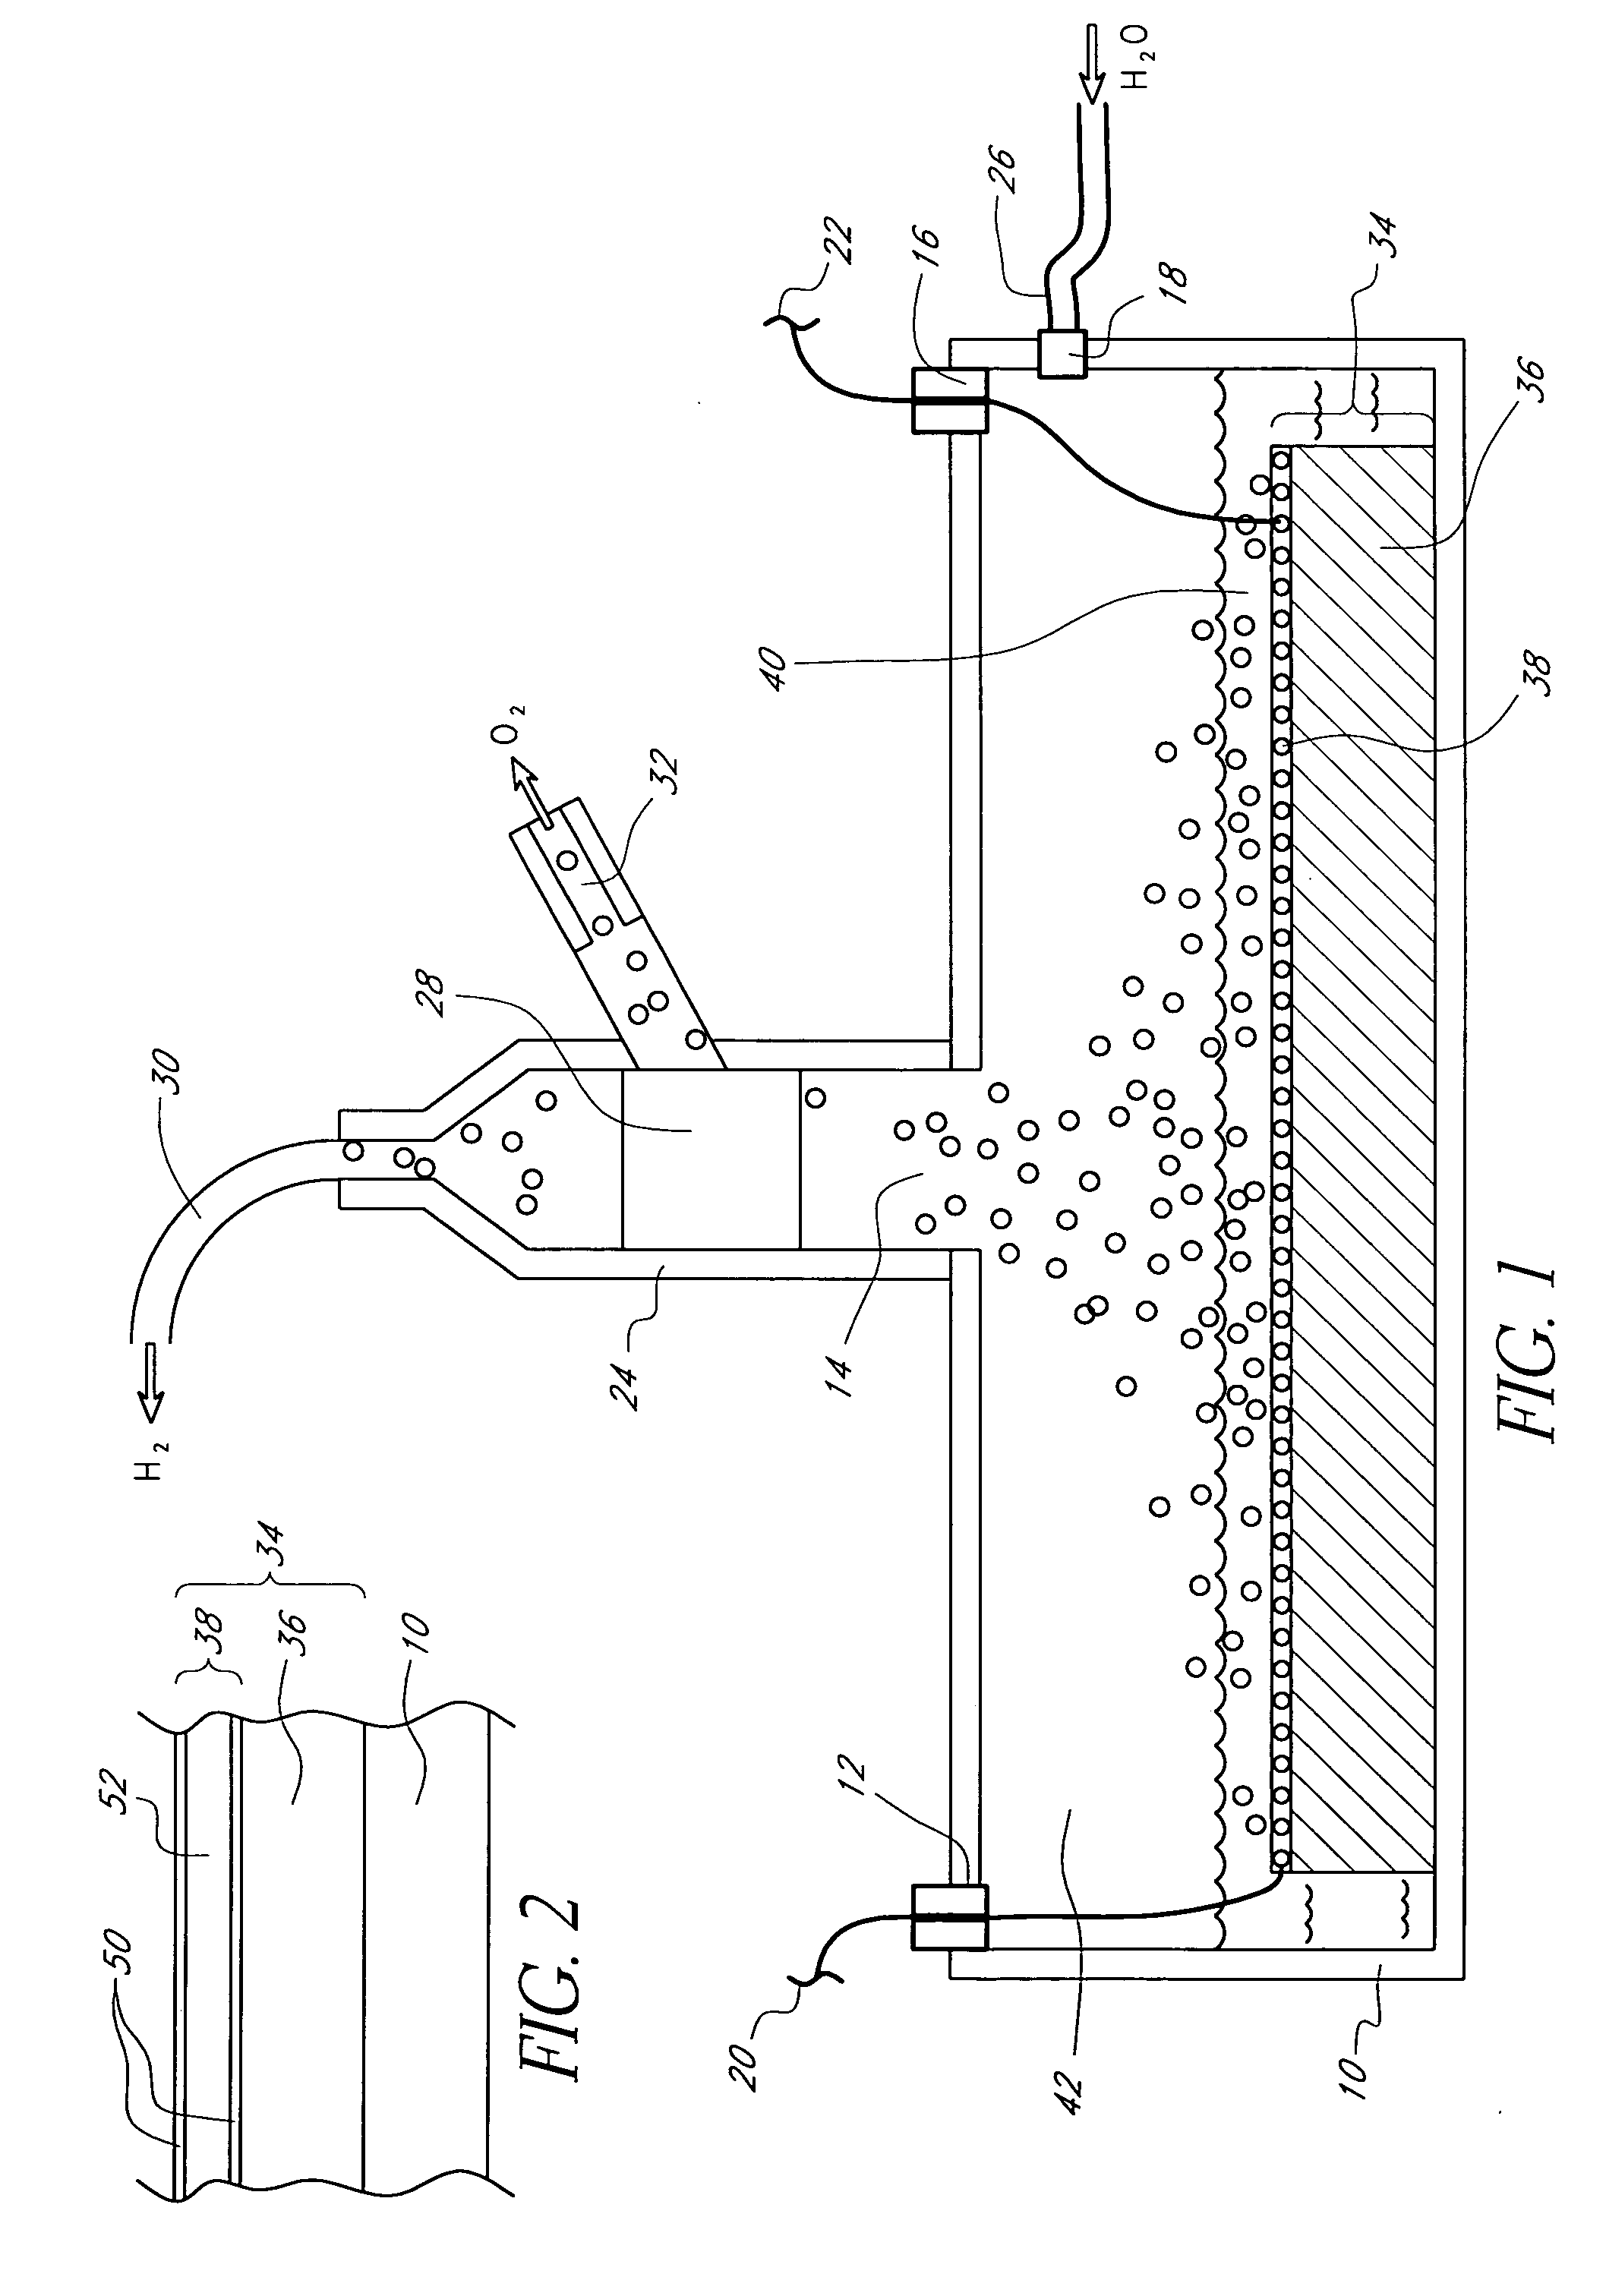 Apparatus and method for generating hydrogen from water